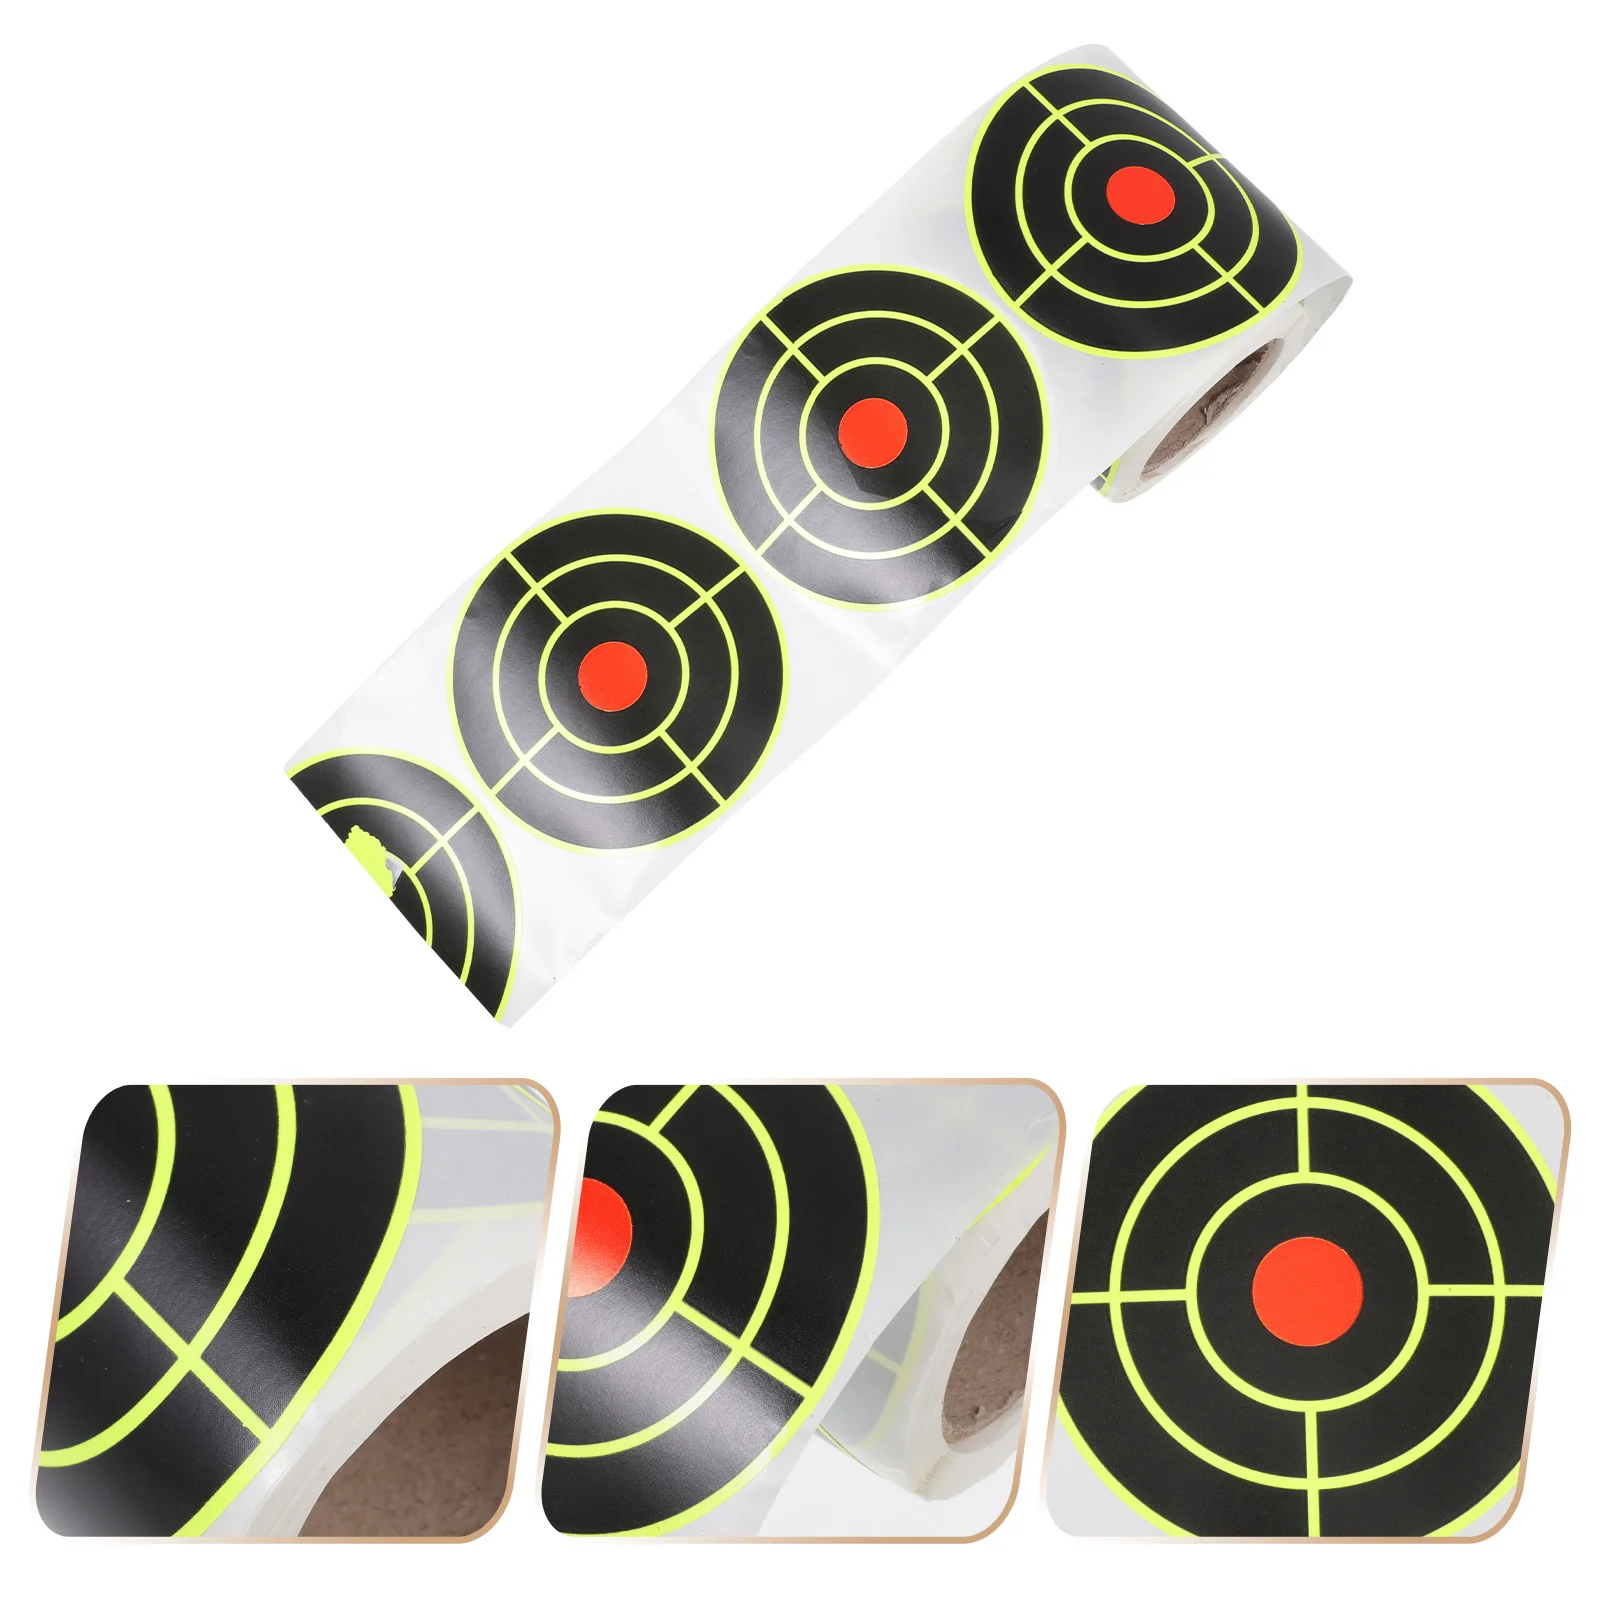 

Target Aim Shooting Papers Paperfluorescent Air Training Bow Targets Archery Stickers Resettingoutdoor Game Simple Tree Mounted